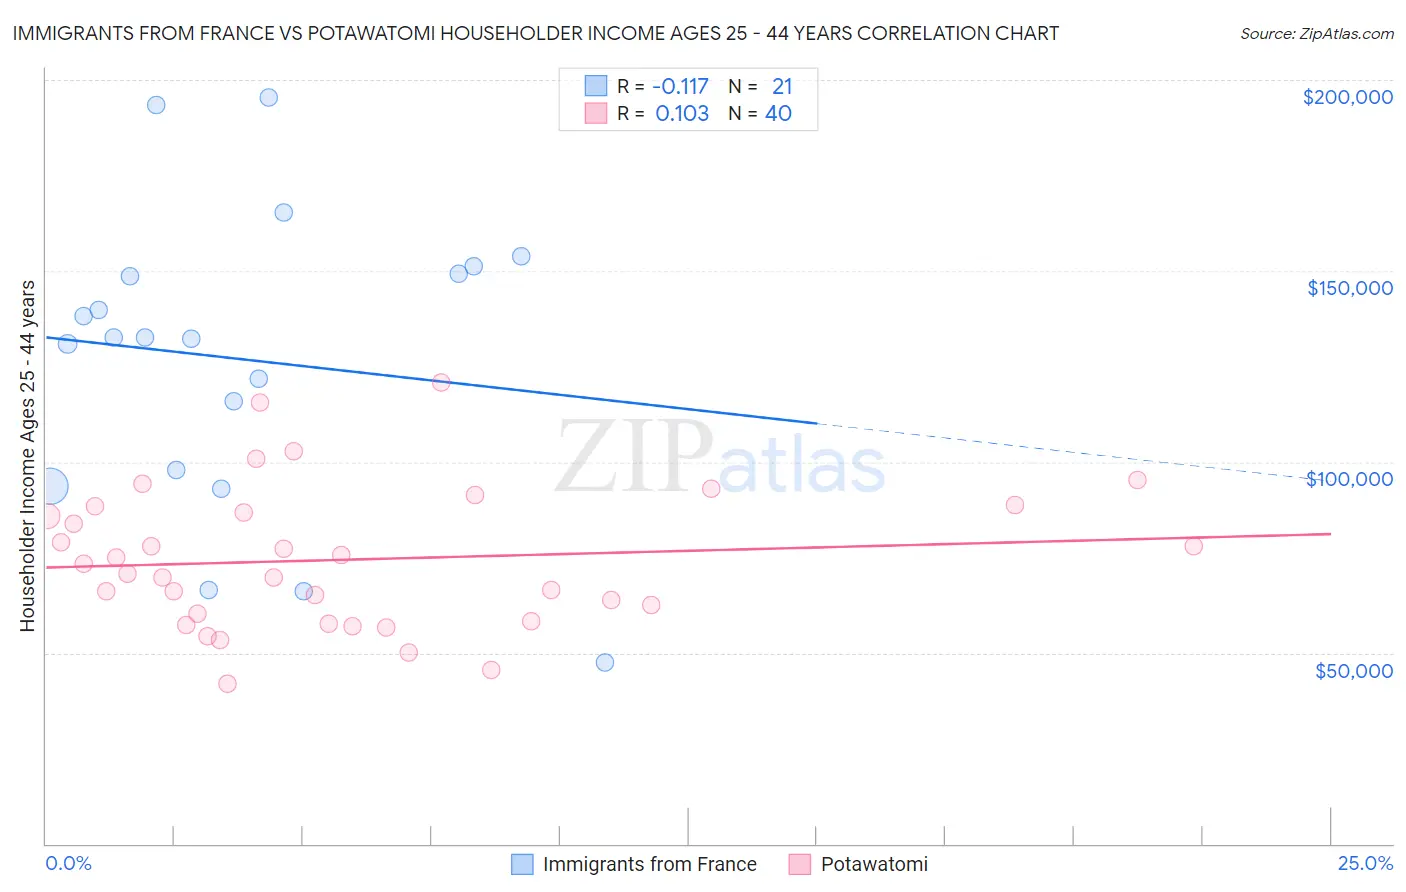 Immigrants from France vs Potawatomi Householder Income Ages 25 - 44 years